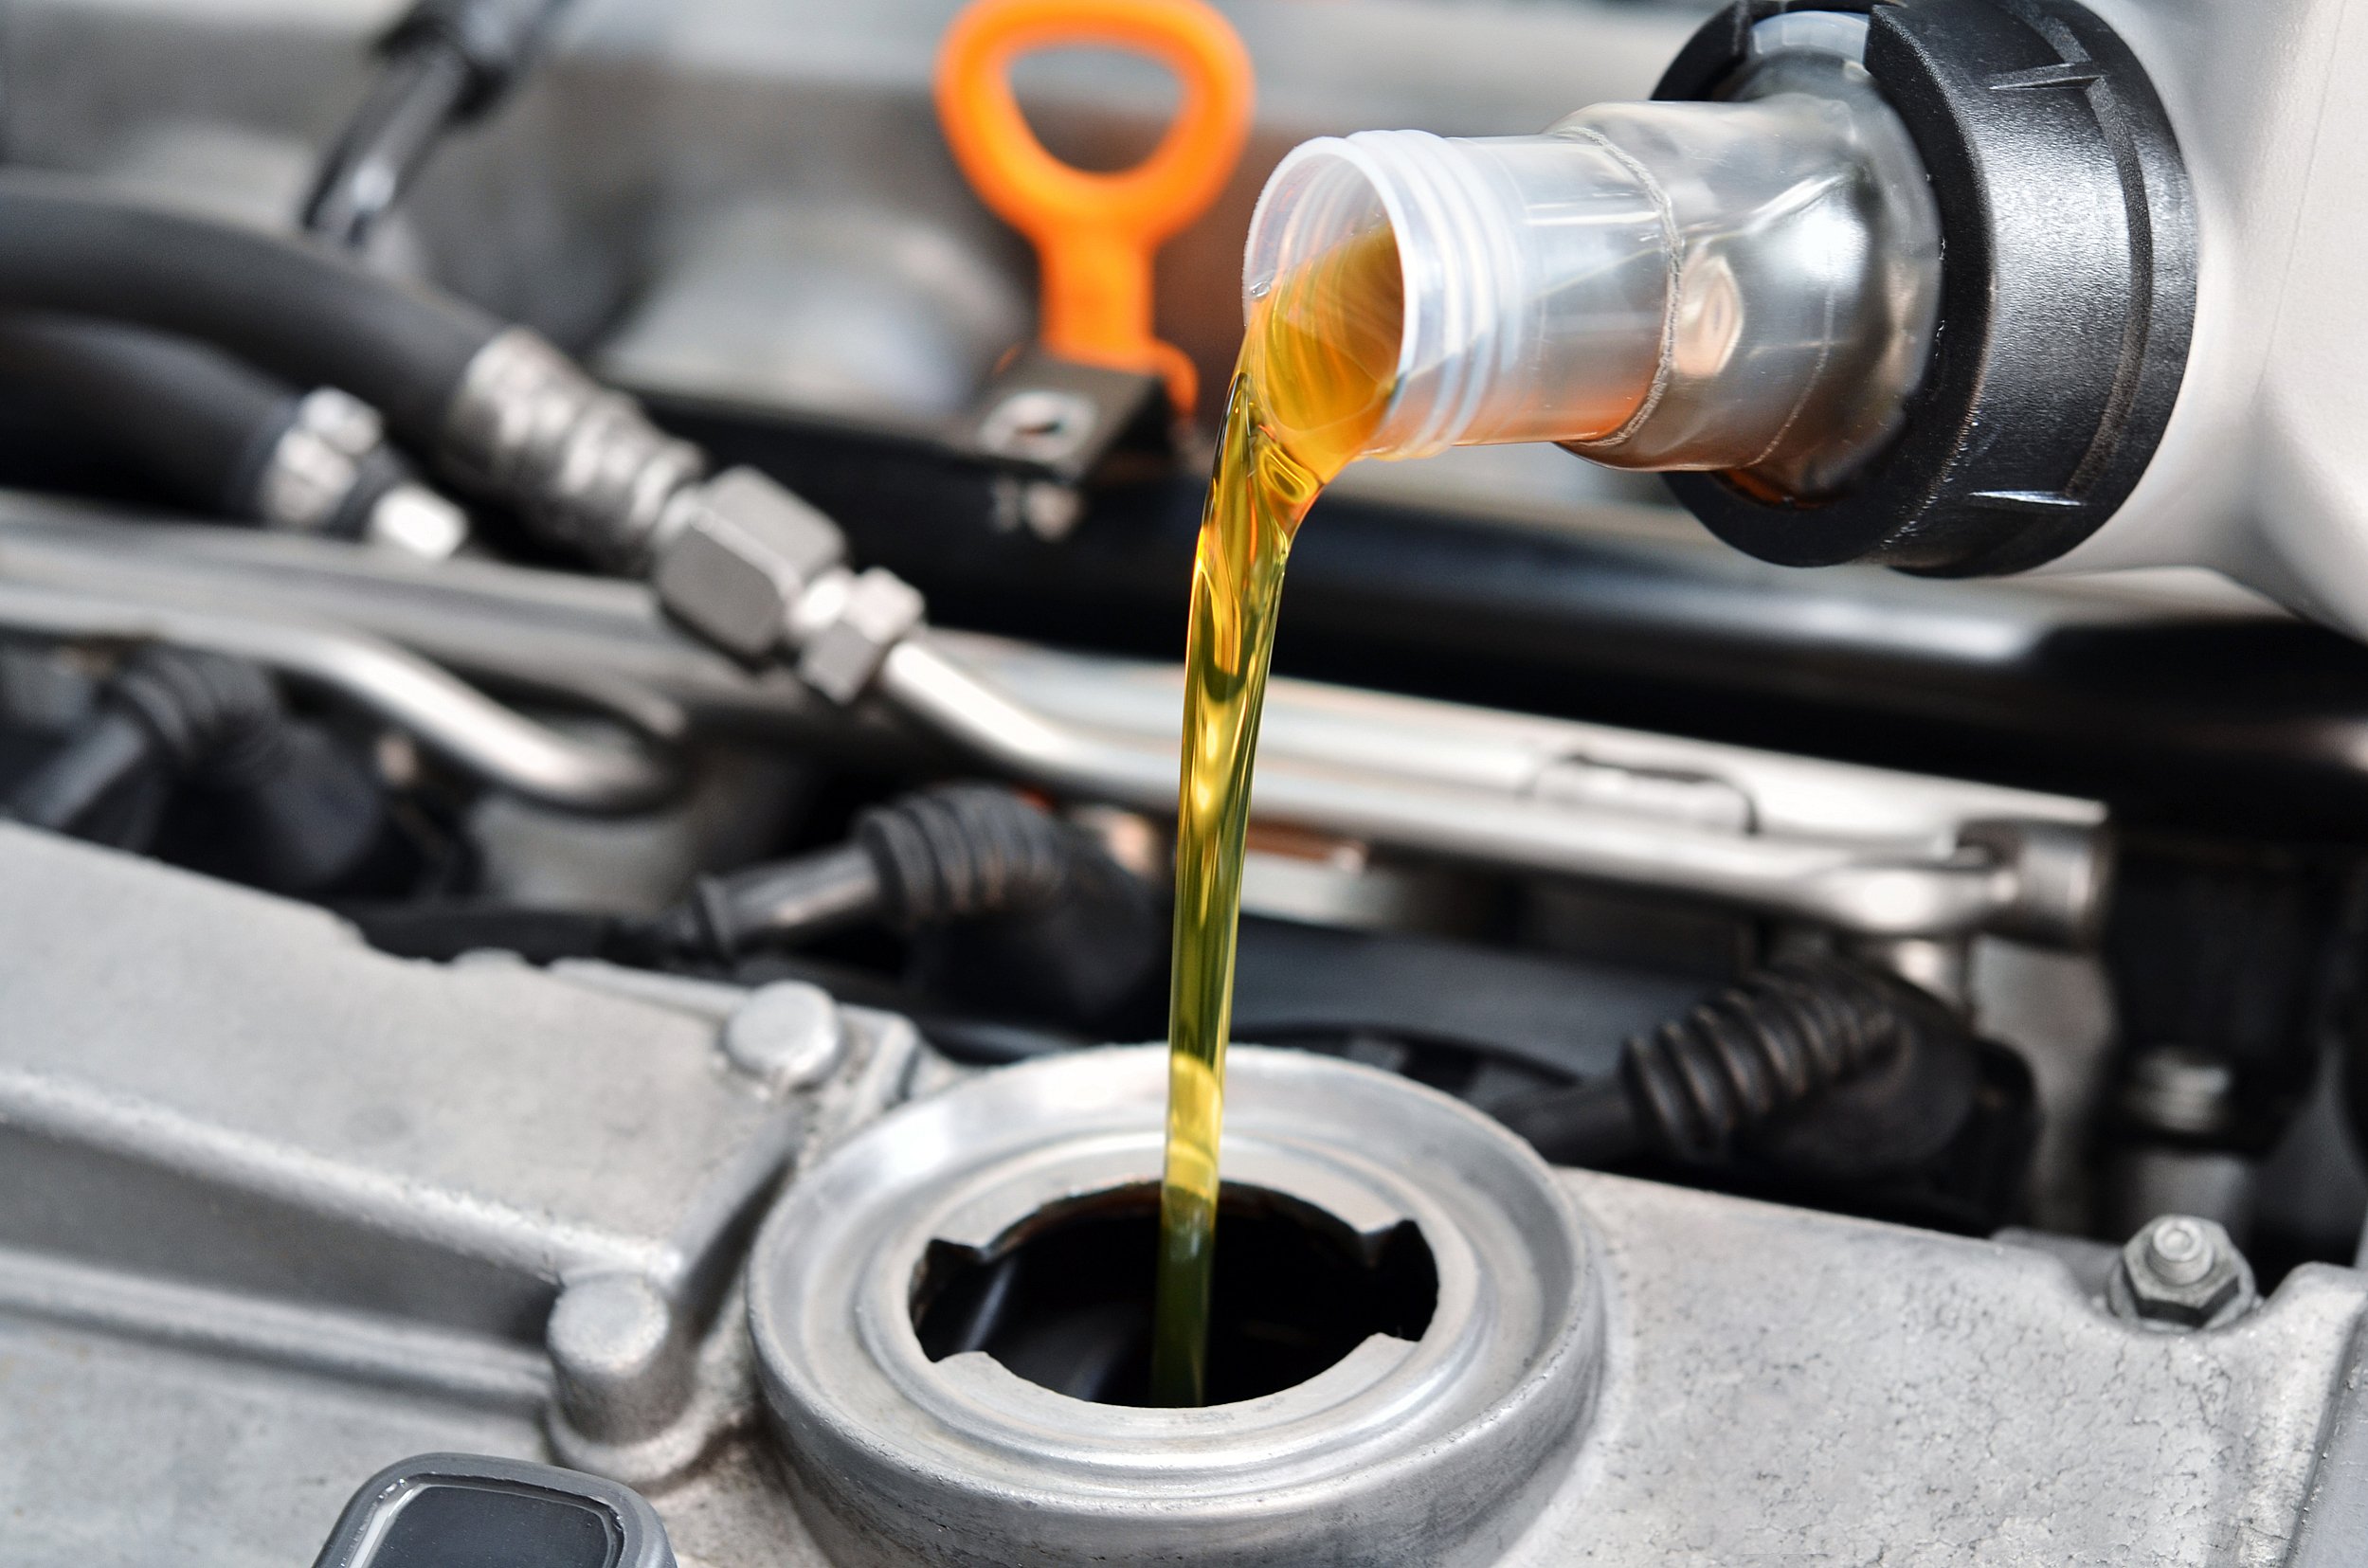 How often do I need to change my cars oil?